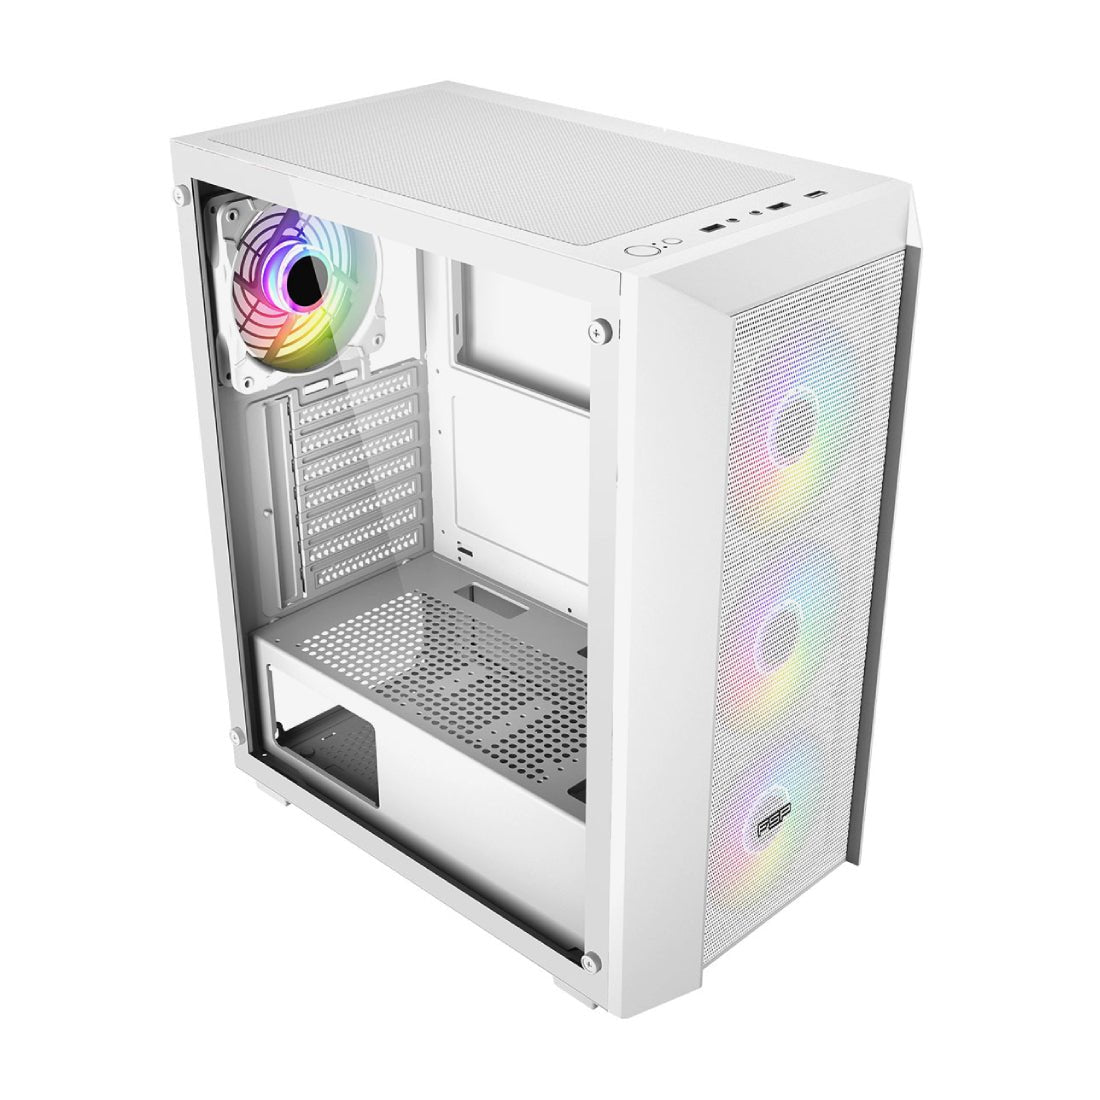 FSP CMT218 ATX Mid Tower Case - White - صندوق - Store 974 | ستور ٩٧٤